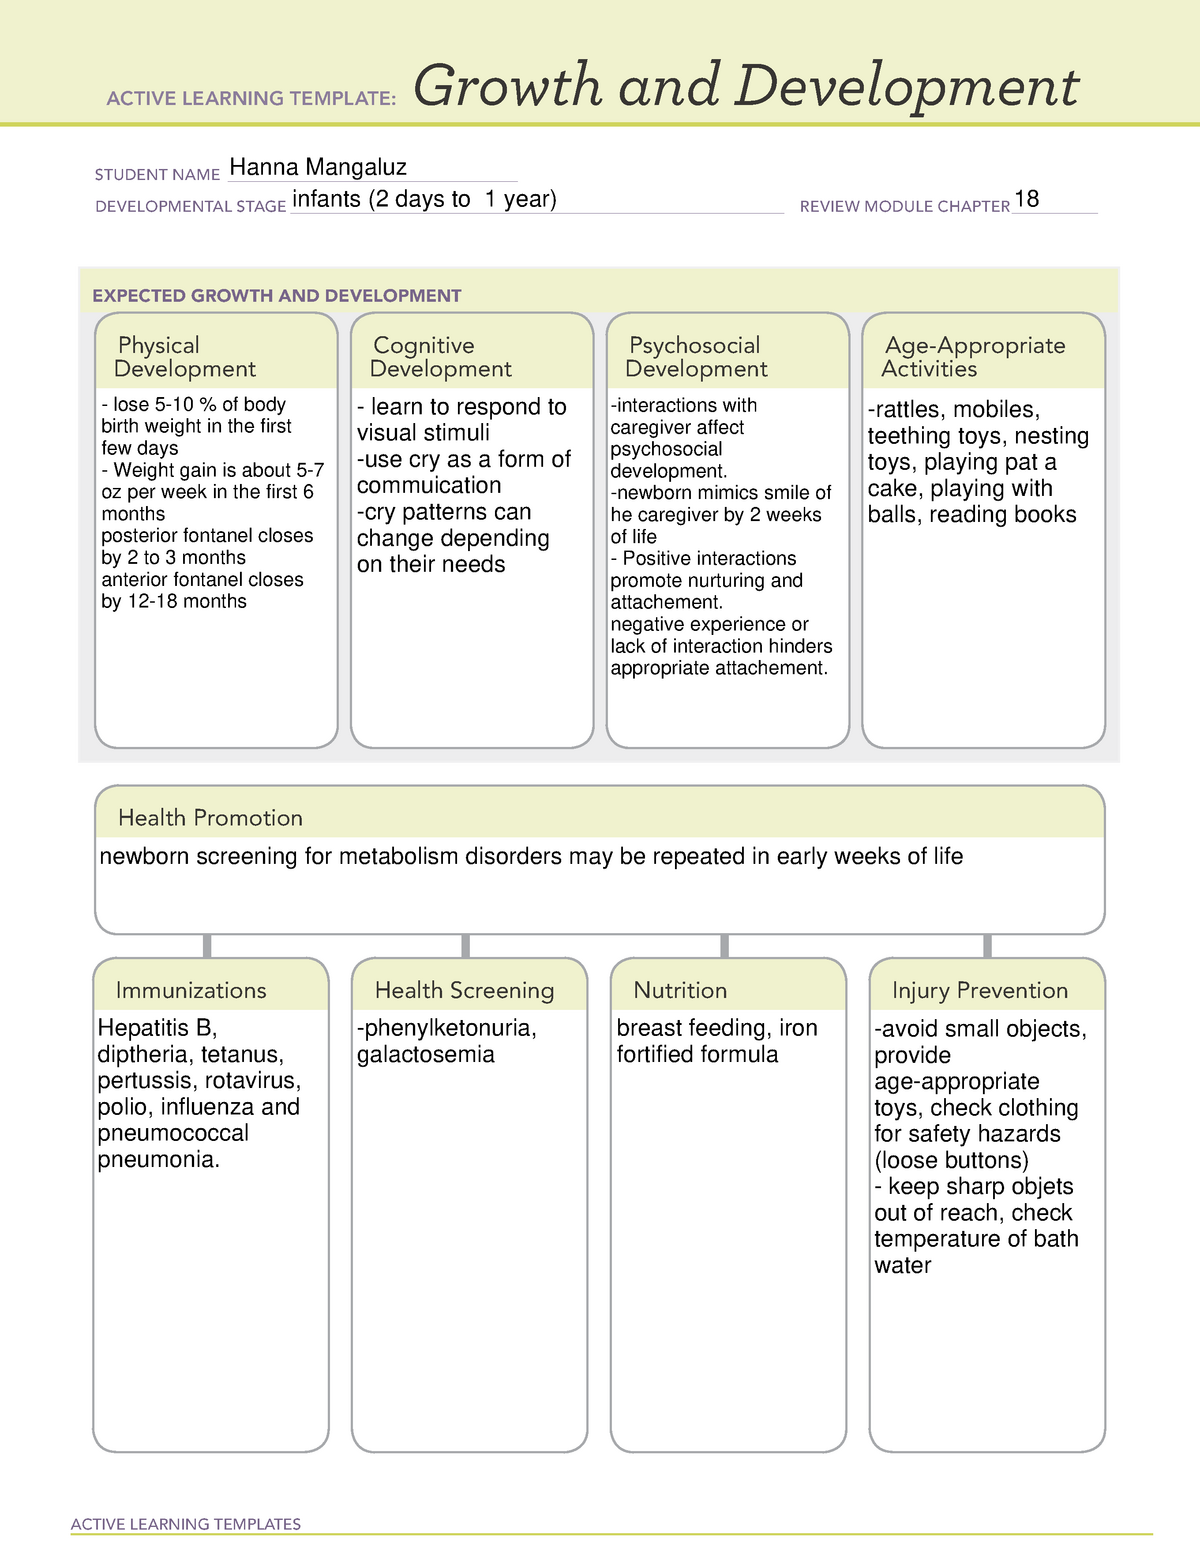 18-ati-active-learning-templates-expected-growth-and-development